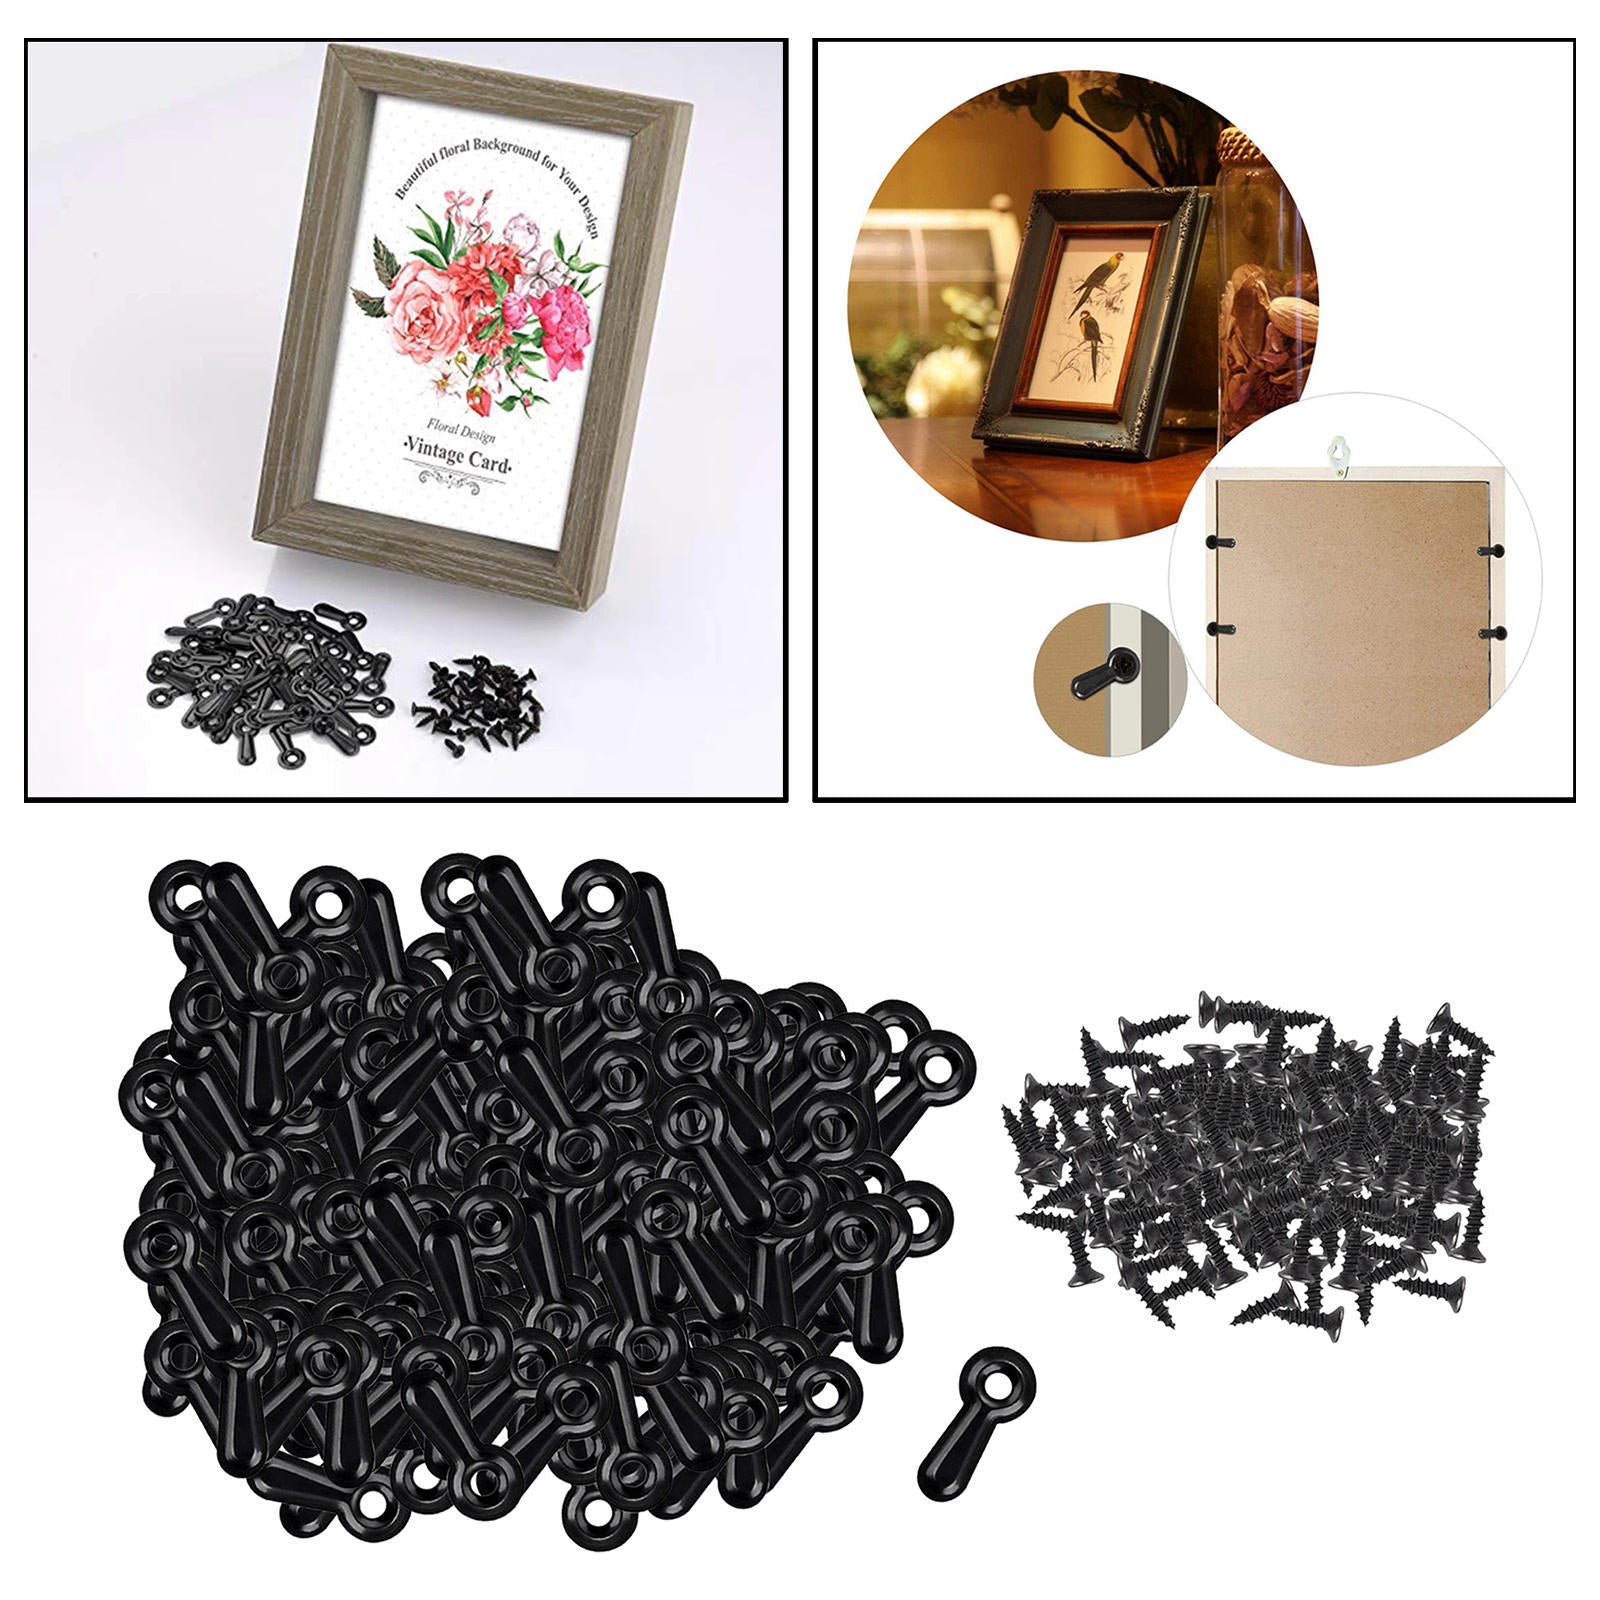 Metal Frame Turn Buttons Fasteners and 300 Screws for Hanging Picture Photos